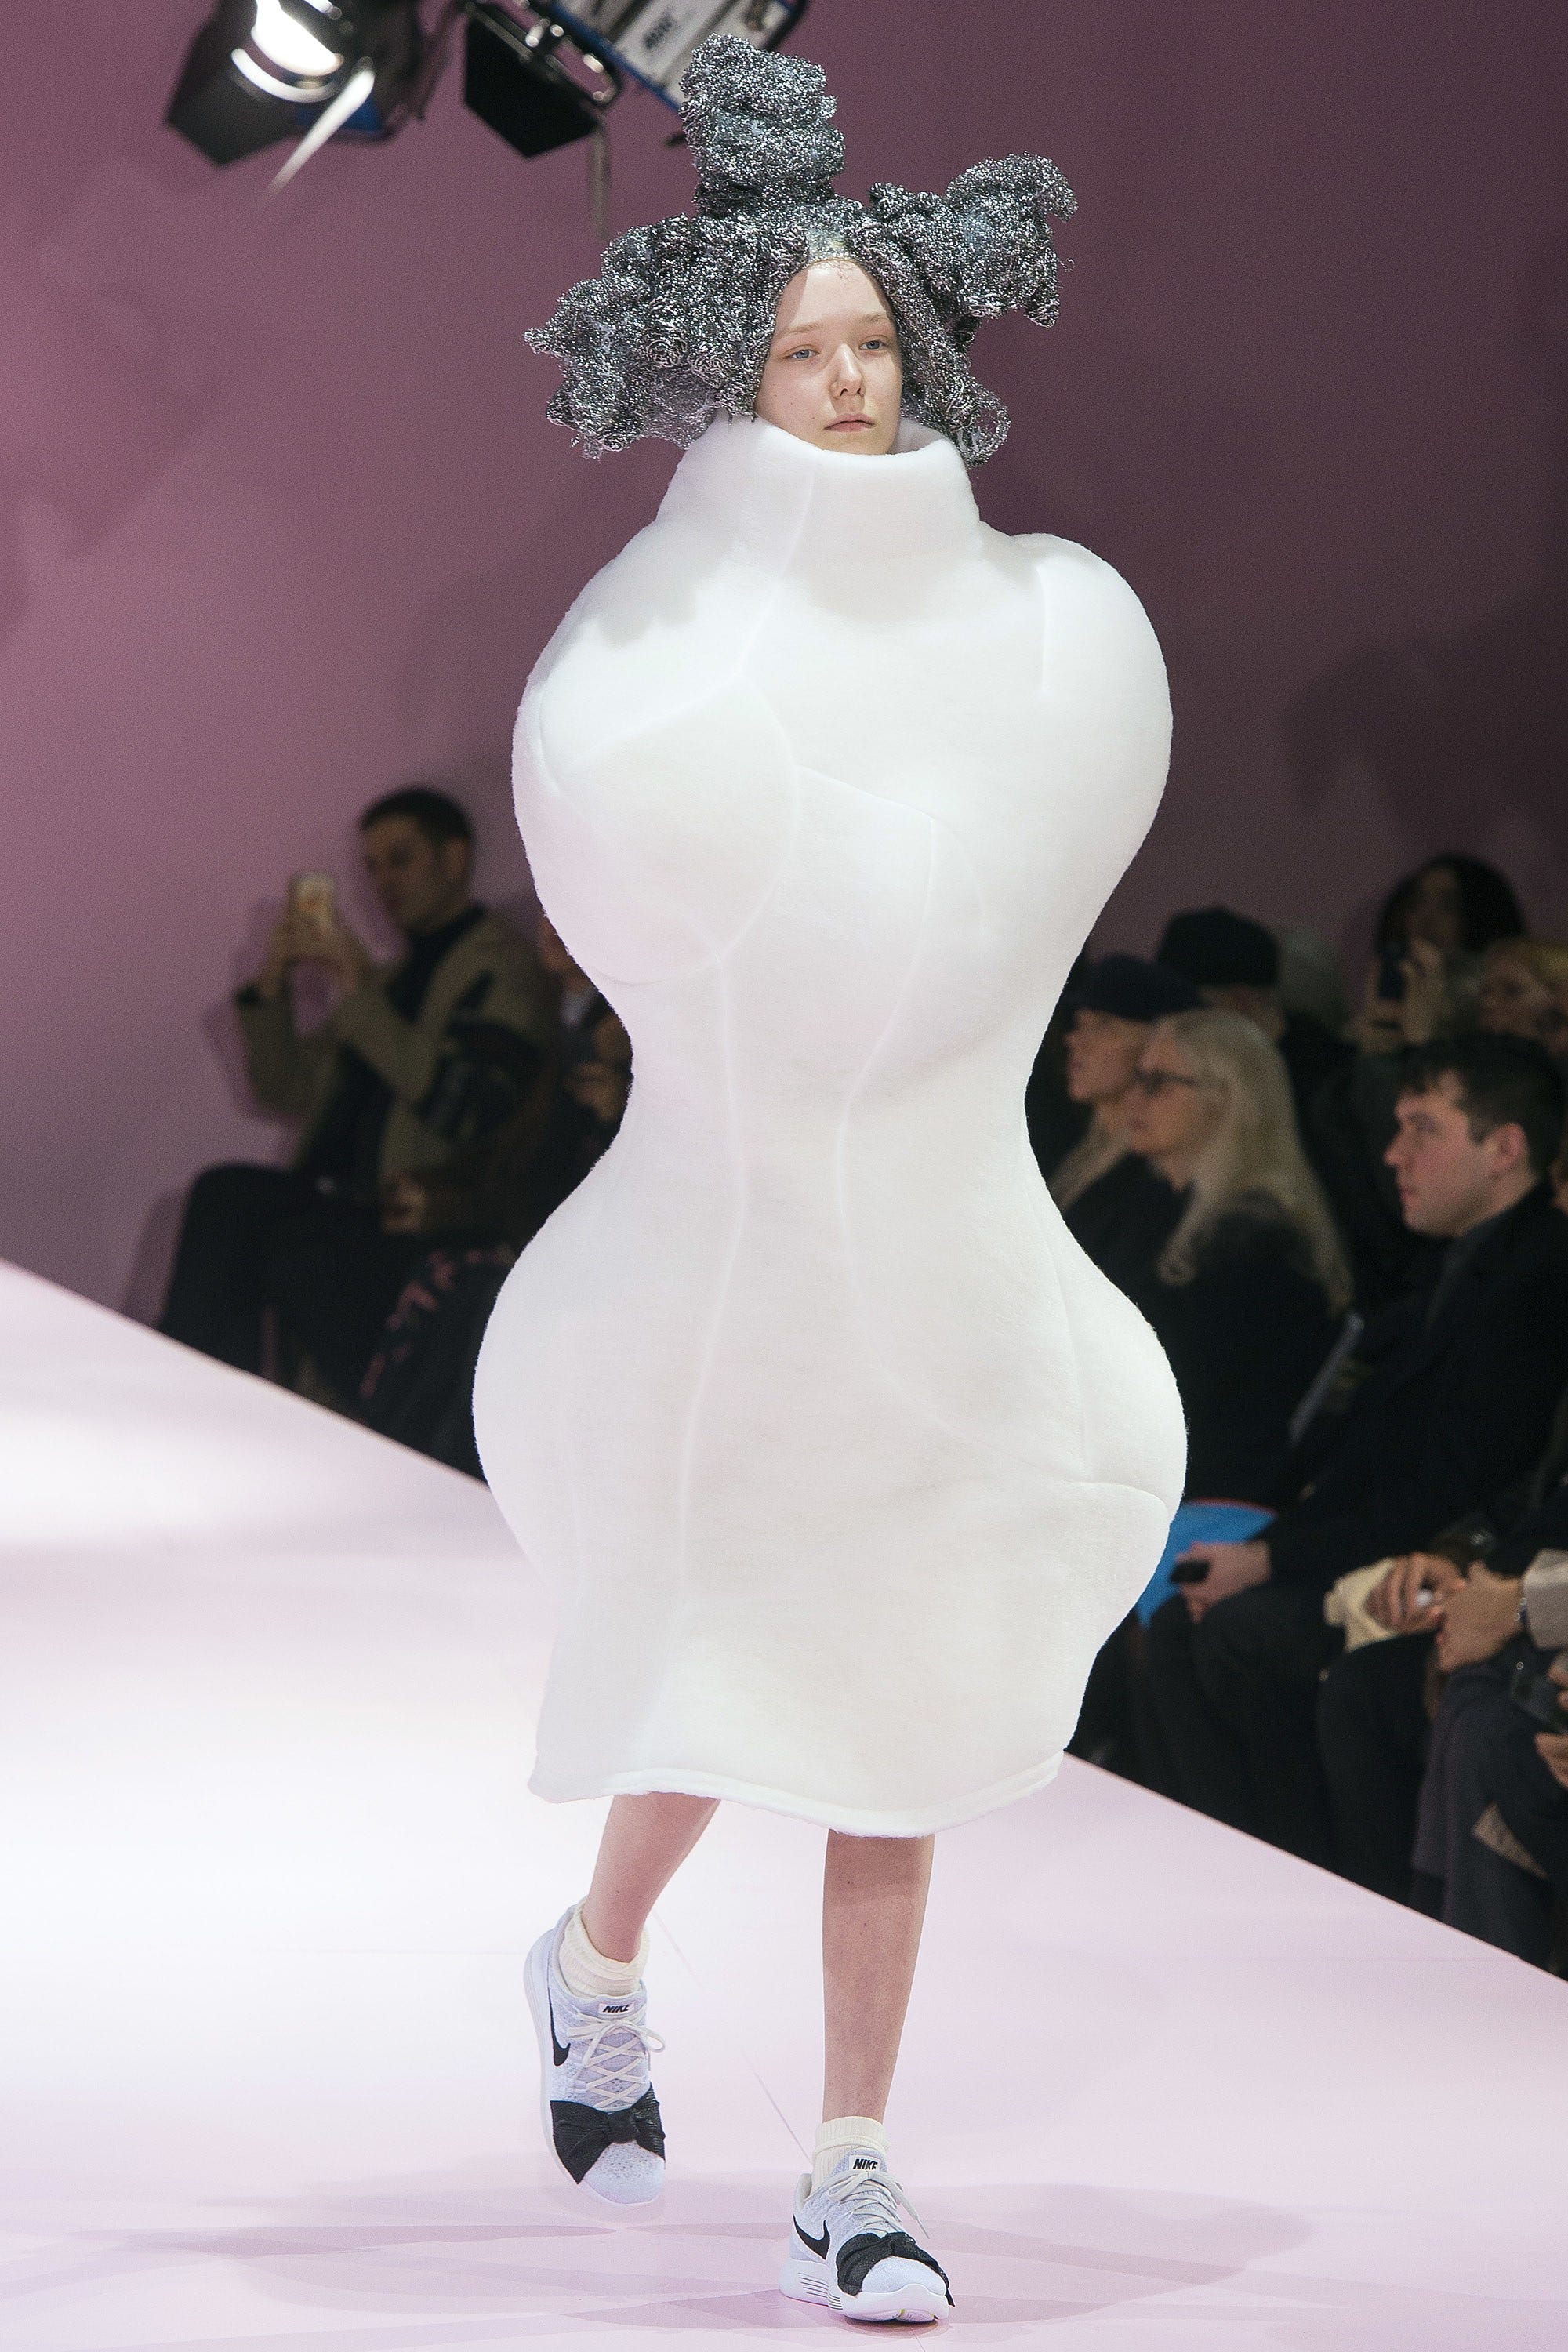 Why are Fashion shows filled with unwearable garments? | by Renaud Petit |  Medium